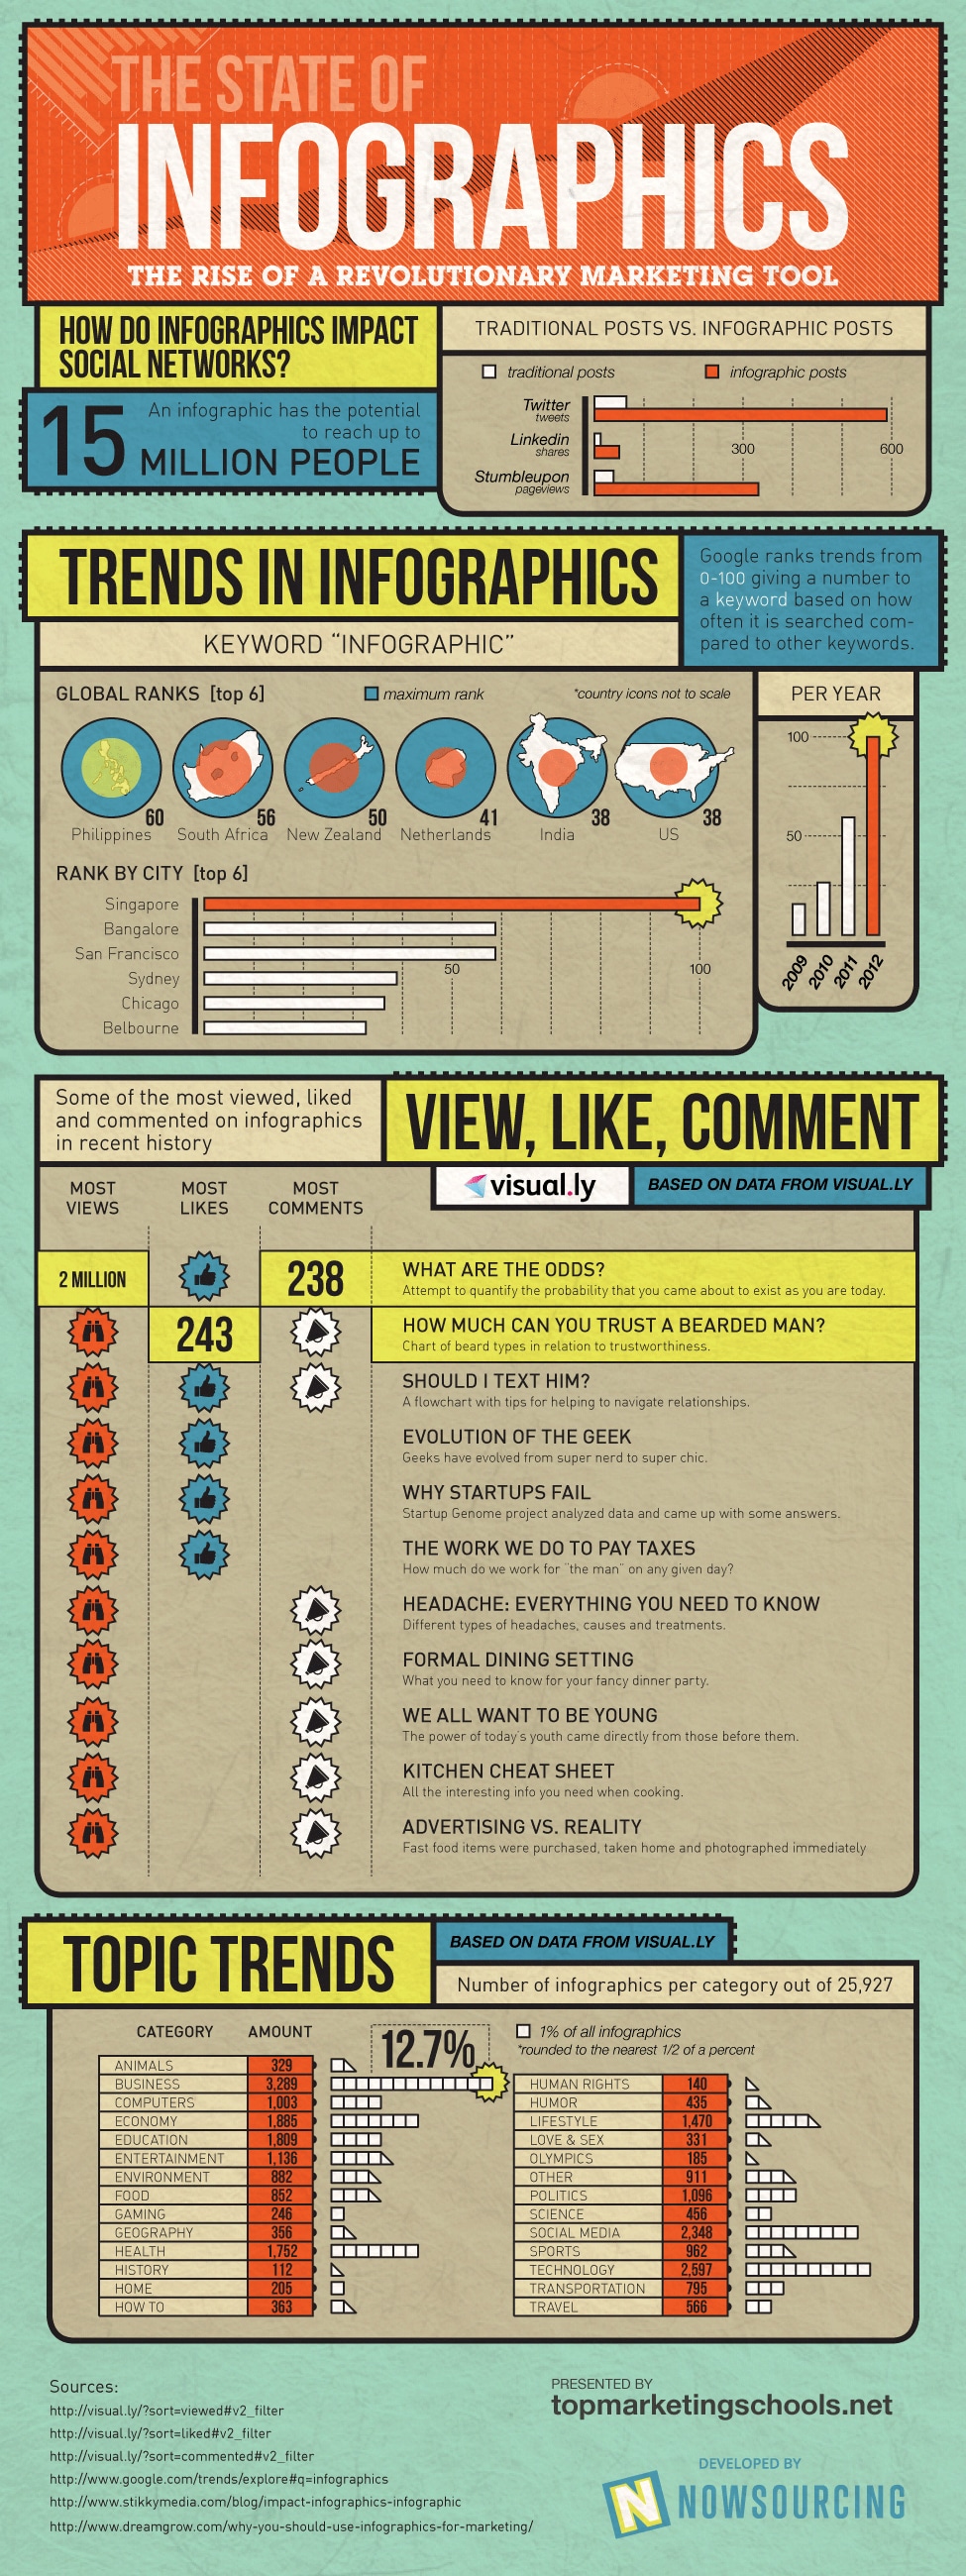 Social Media ROI: The State Of Infographics In 2013 [Infographic]